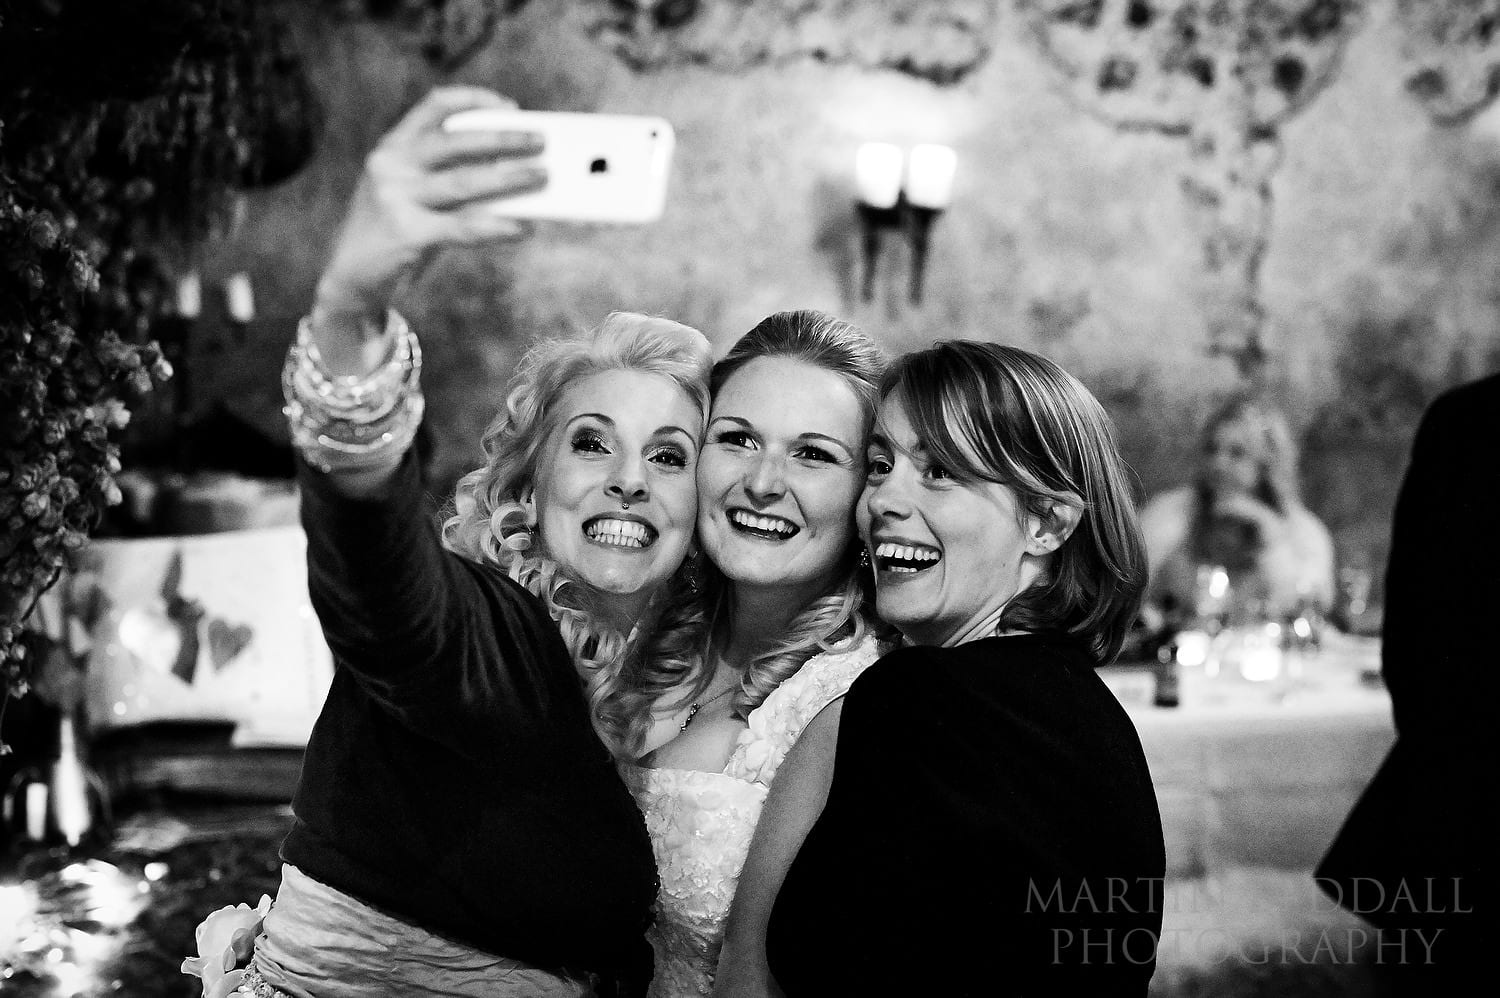 Selfie with the bride